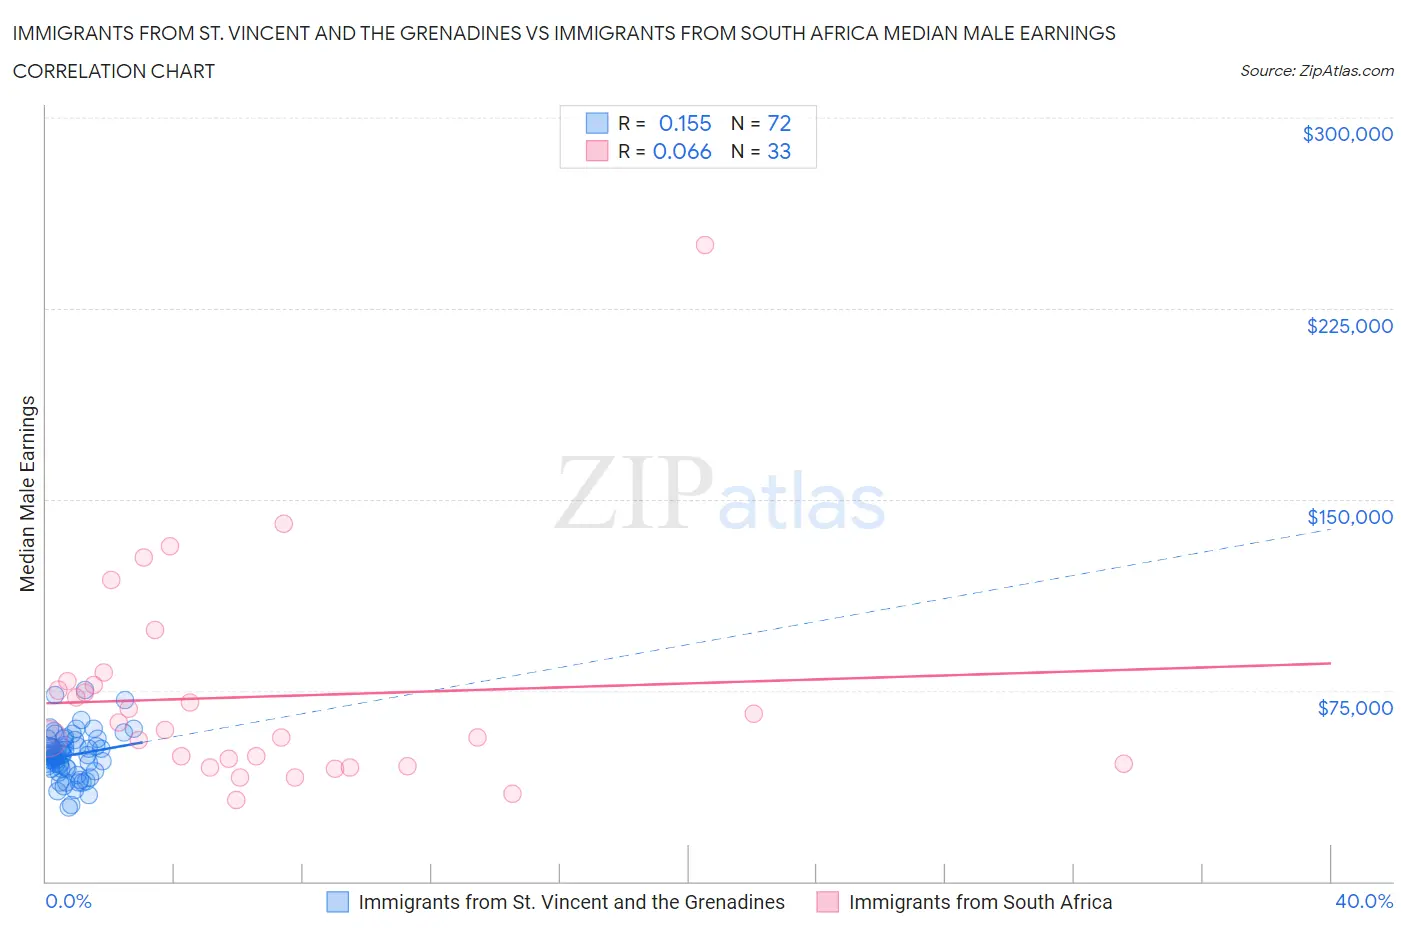 Immigrants from St. Vincent and the Grenadines vs Immigrants from South Africa Median Male Earnings